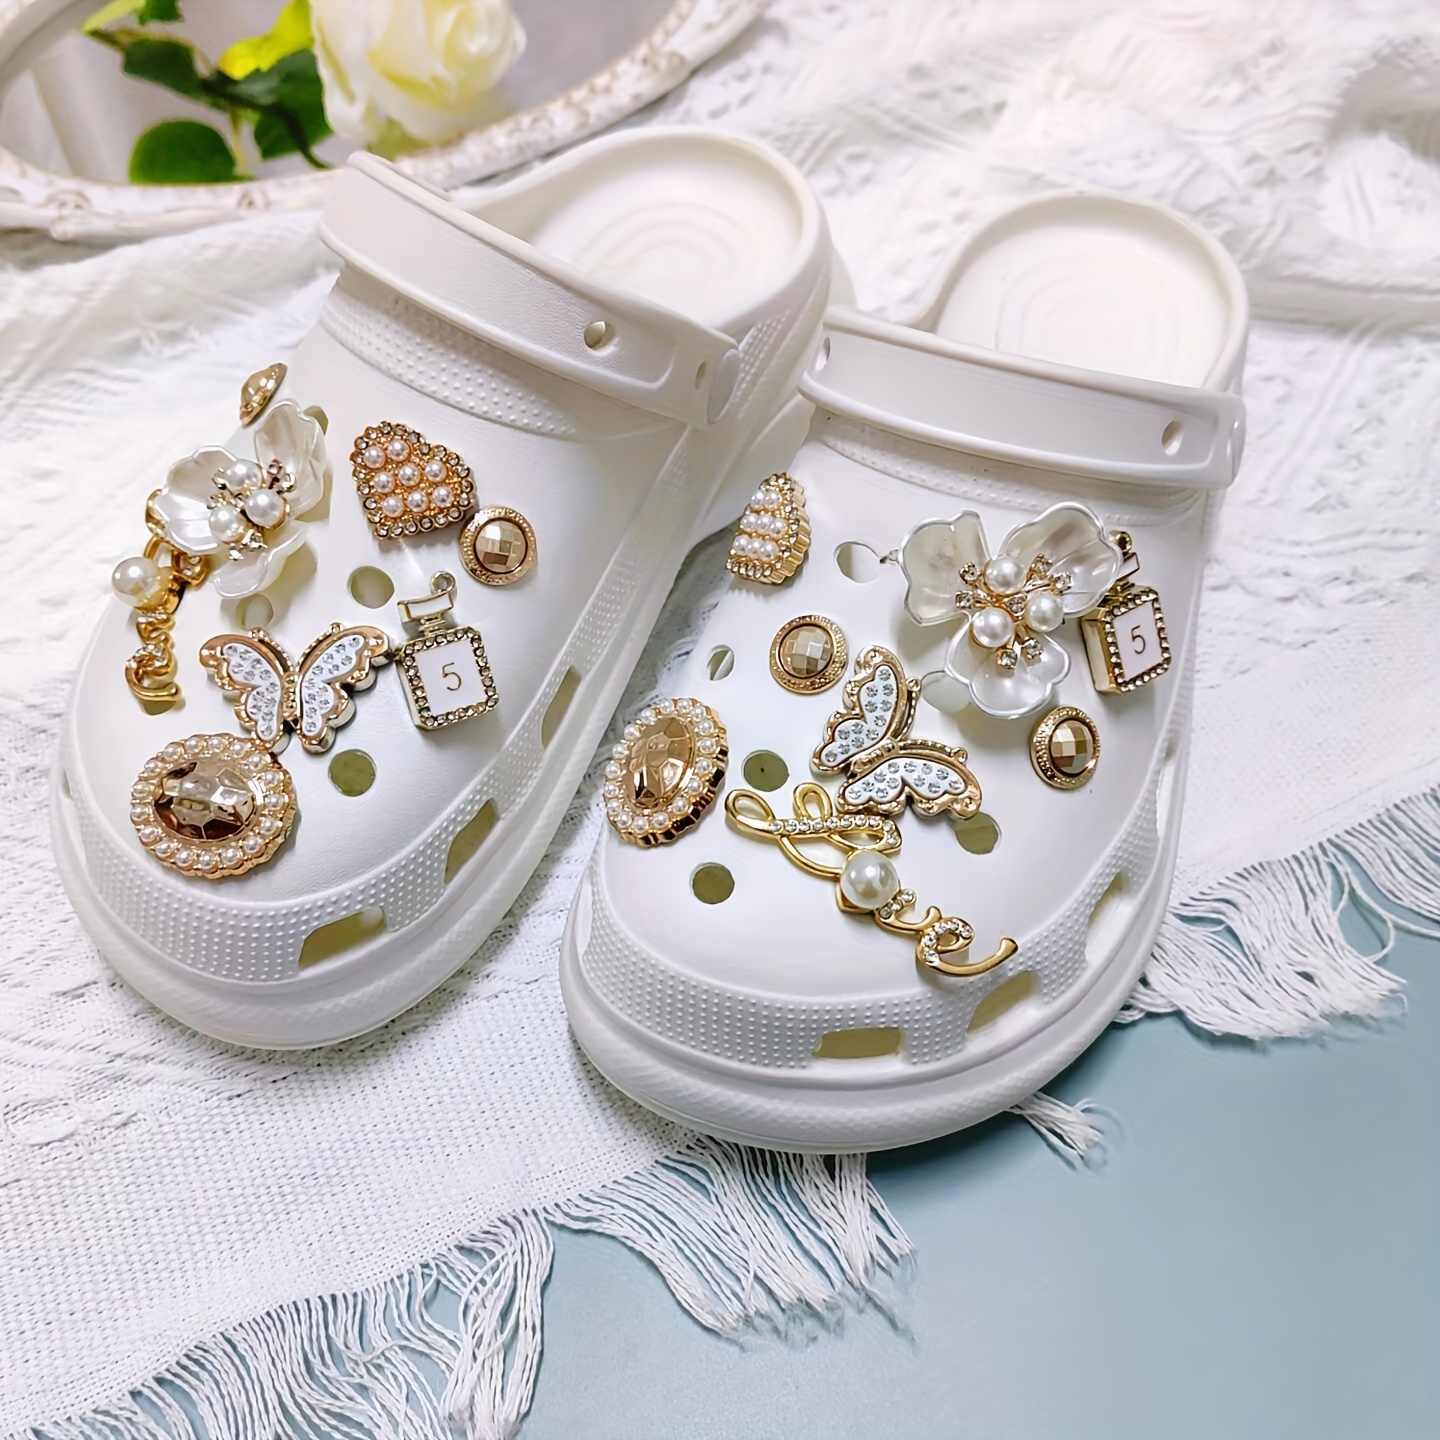 Rhinestone Set Croc Shoes Charms Butterfly Kit Pearl Flower Gold